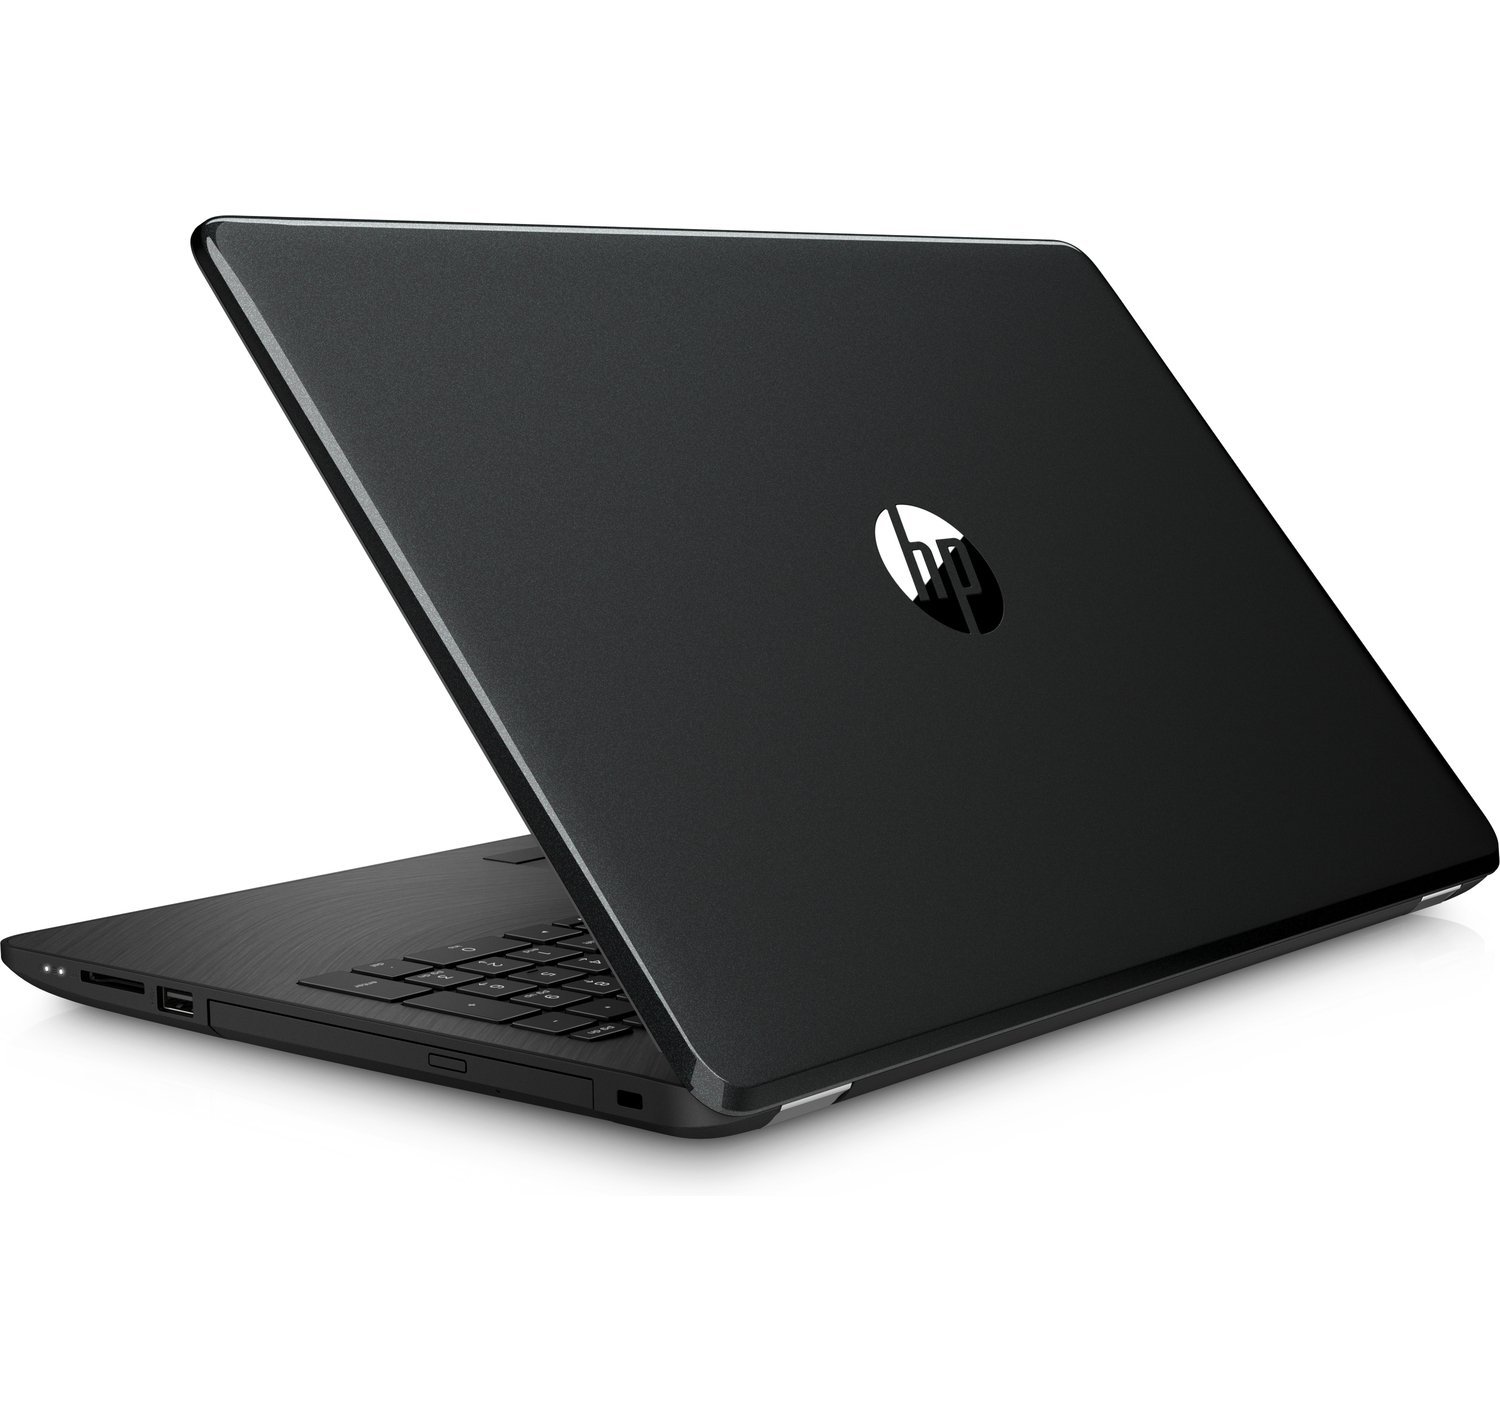 HP 15-bs145tu 15.6-inch FHD Laptop (8th Gen Intel Core i5-8250U/8GB/1TB/Free DOS/Integrated Graphics), Sparkling Black Price in India